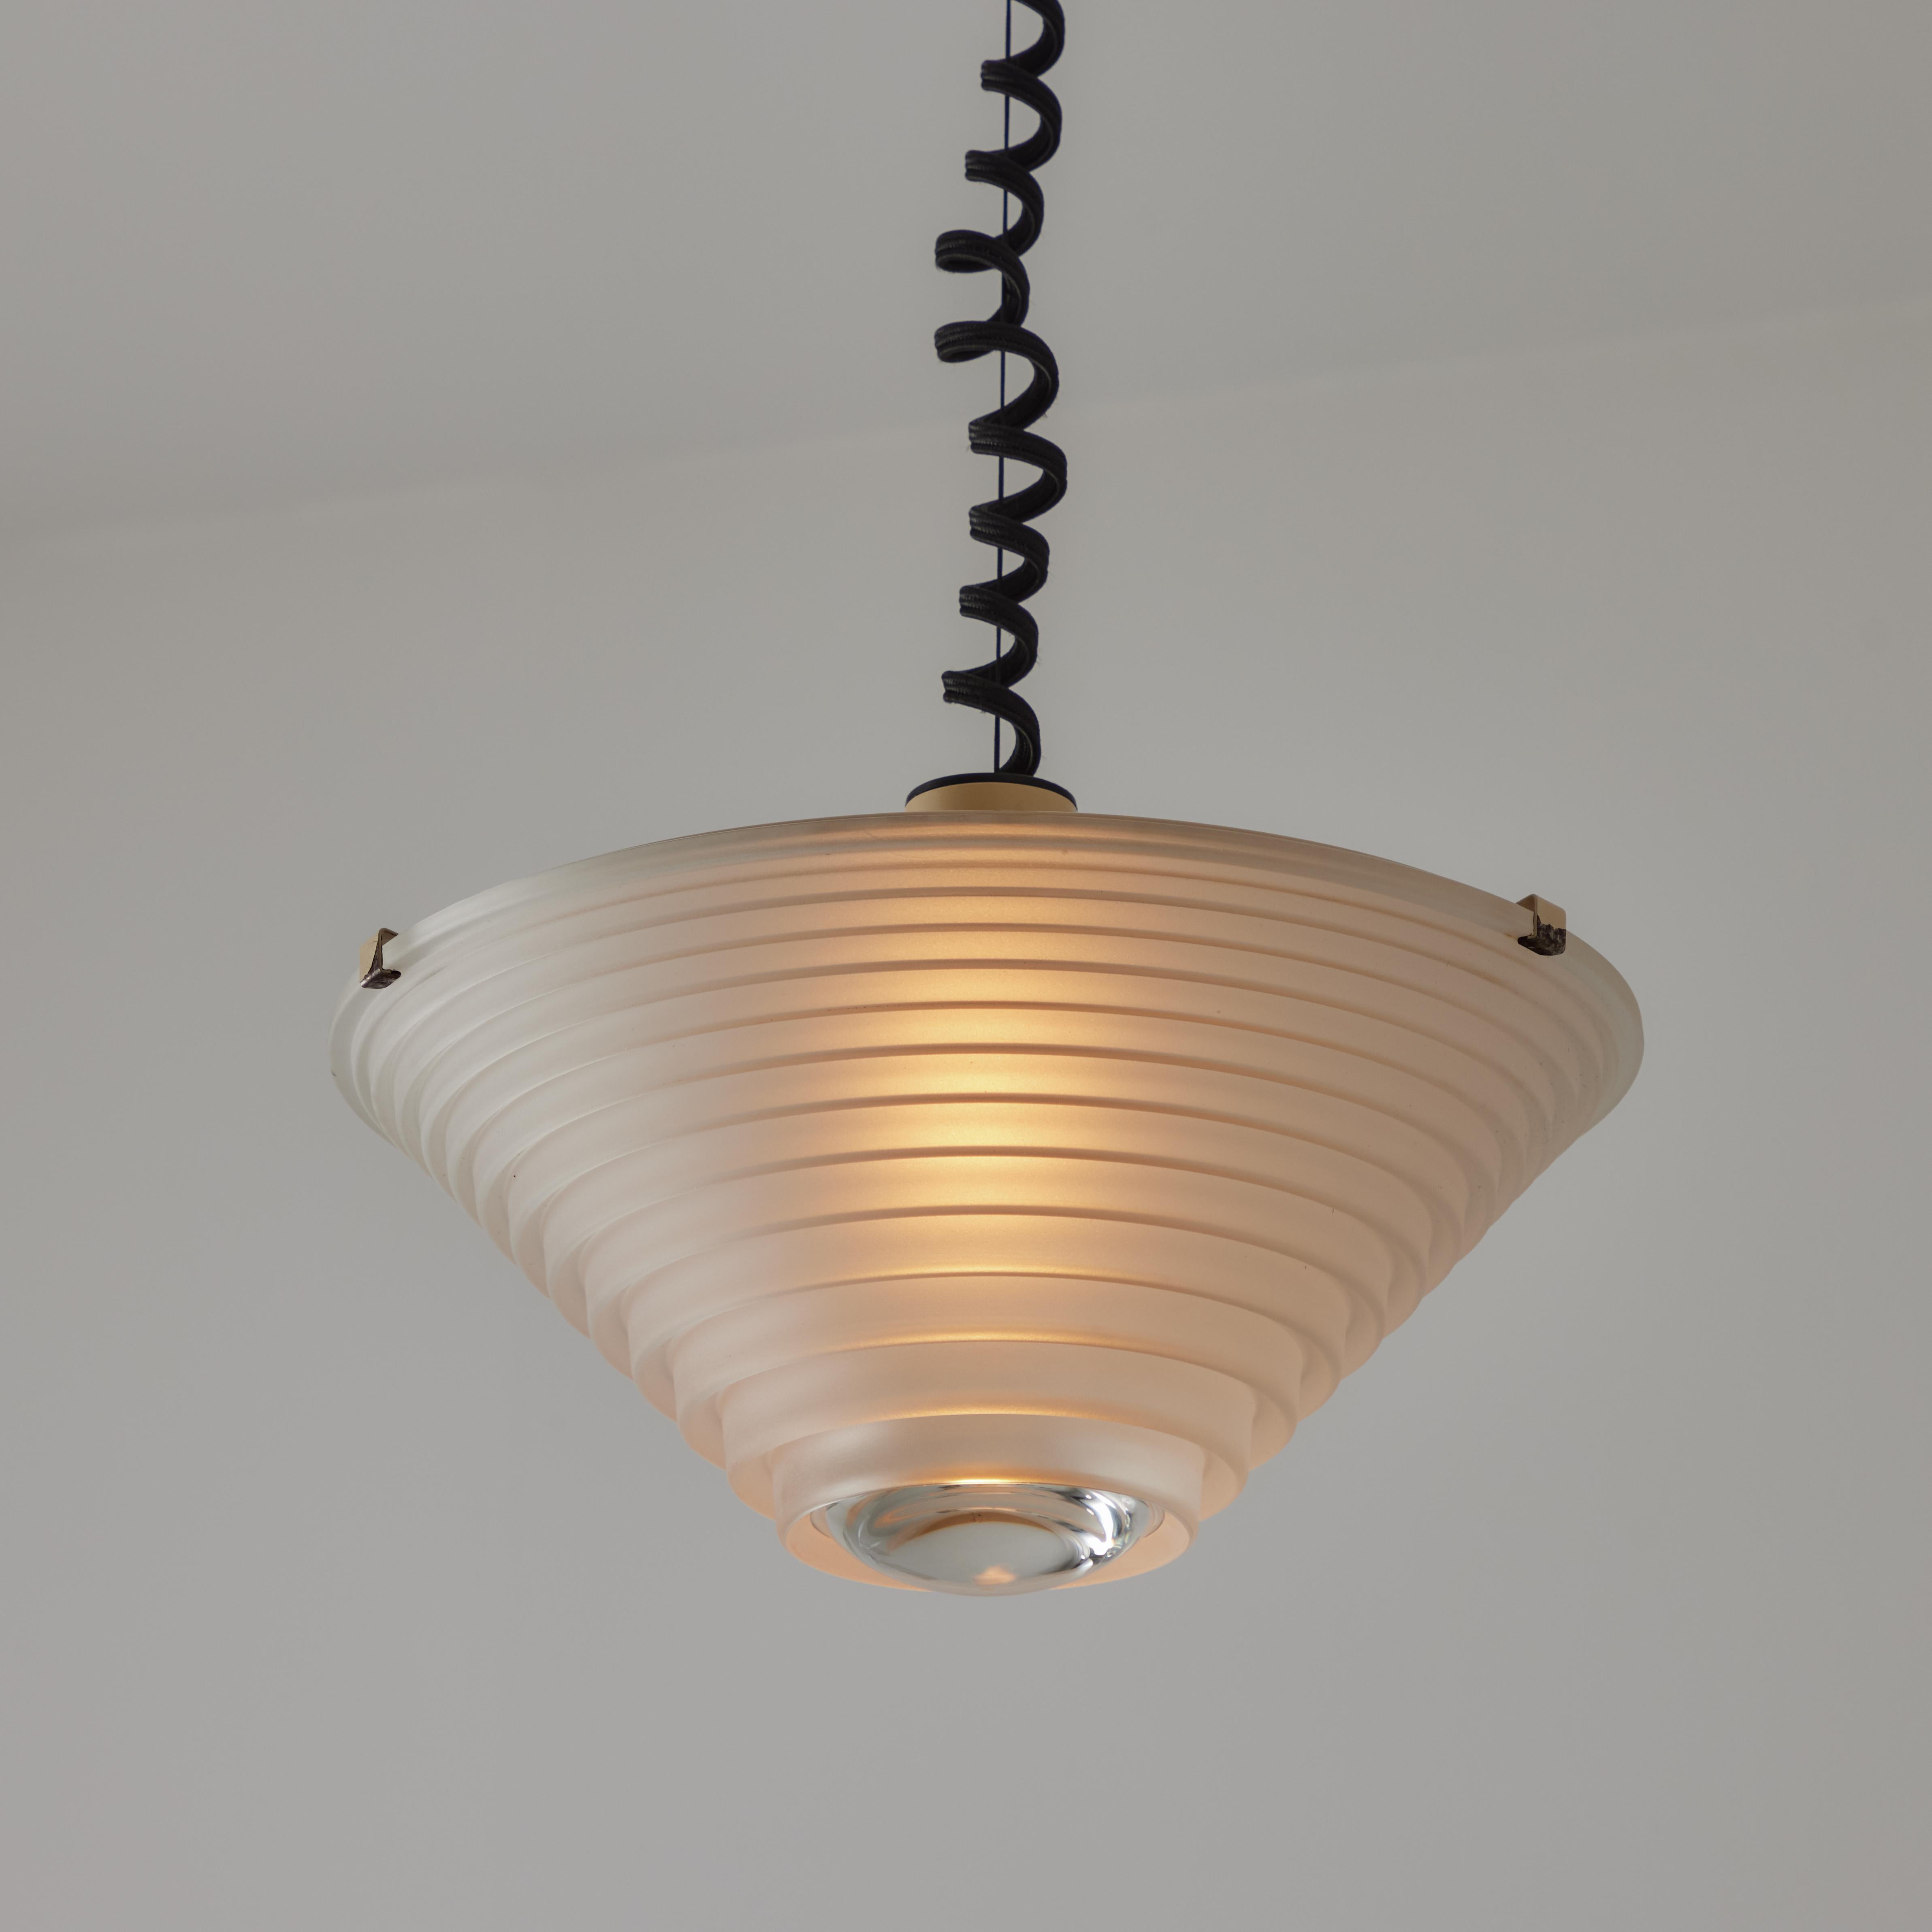 ‘Egina’ Pendant by Angelo Mangiarotti for Artemide In Good Condition For Sale In Los Angeles, CA